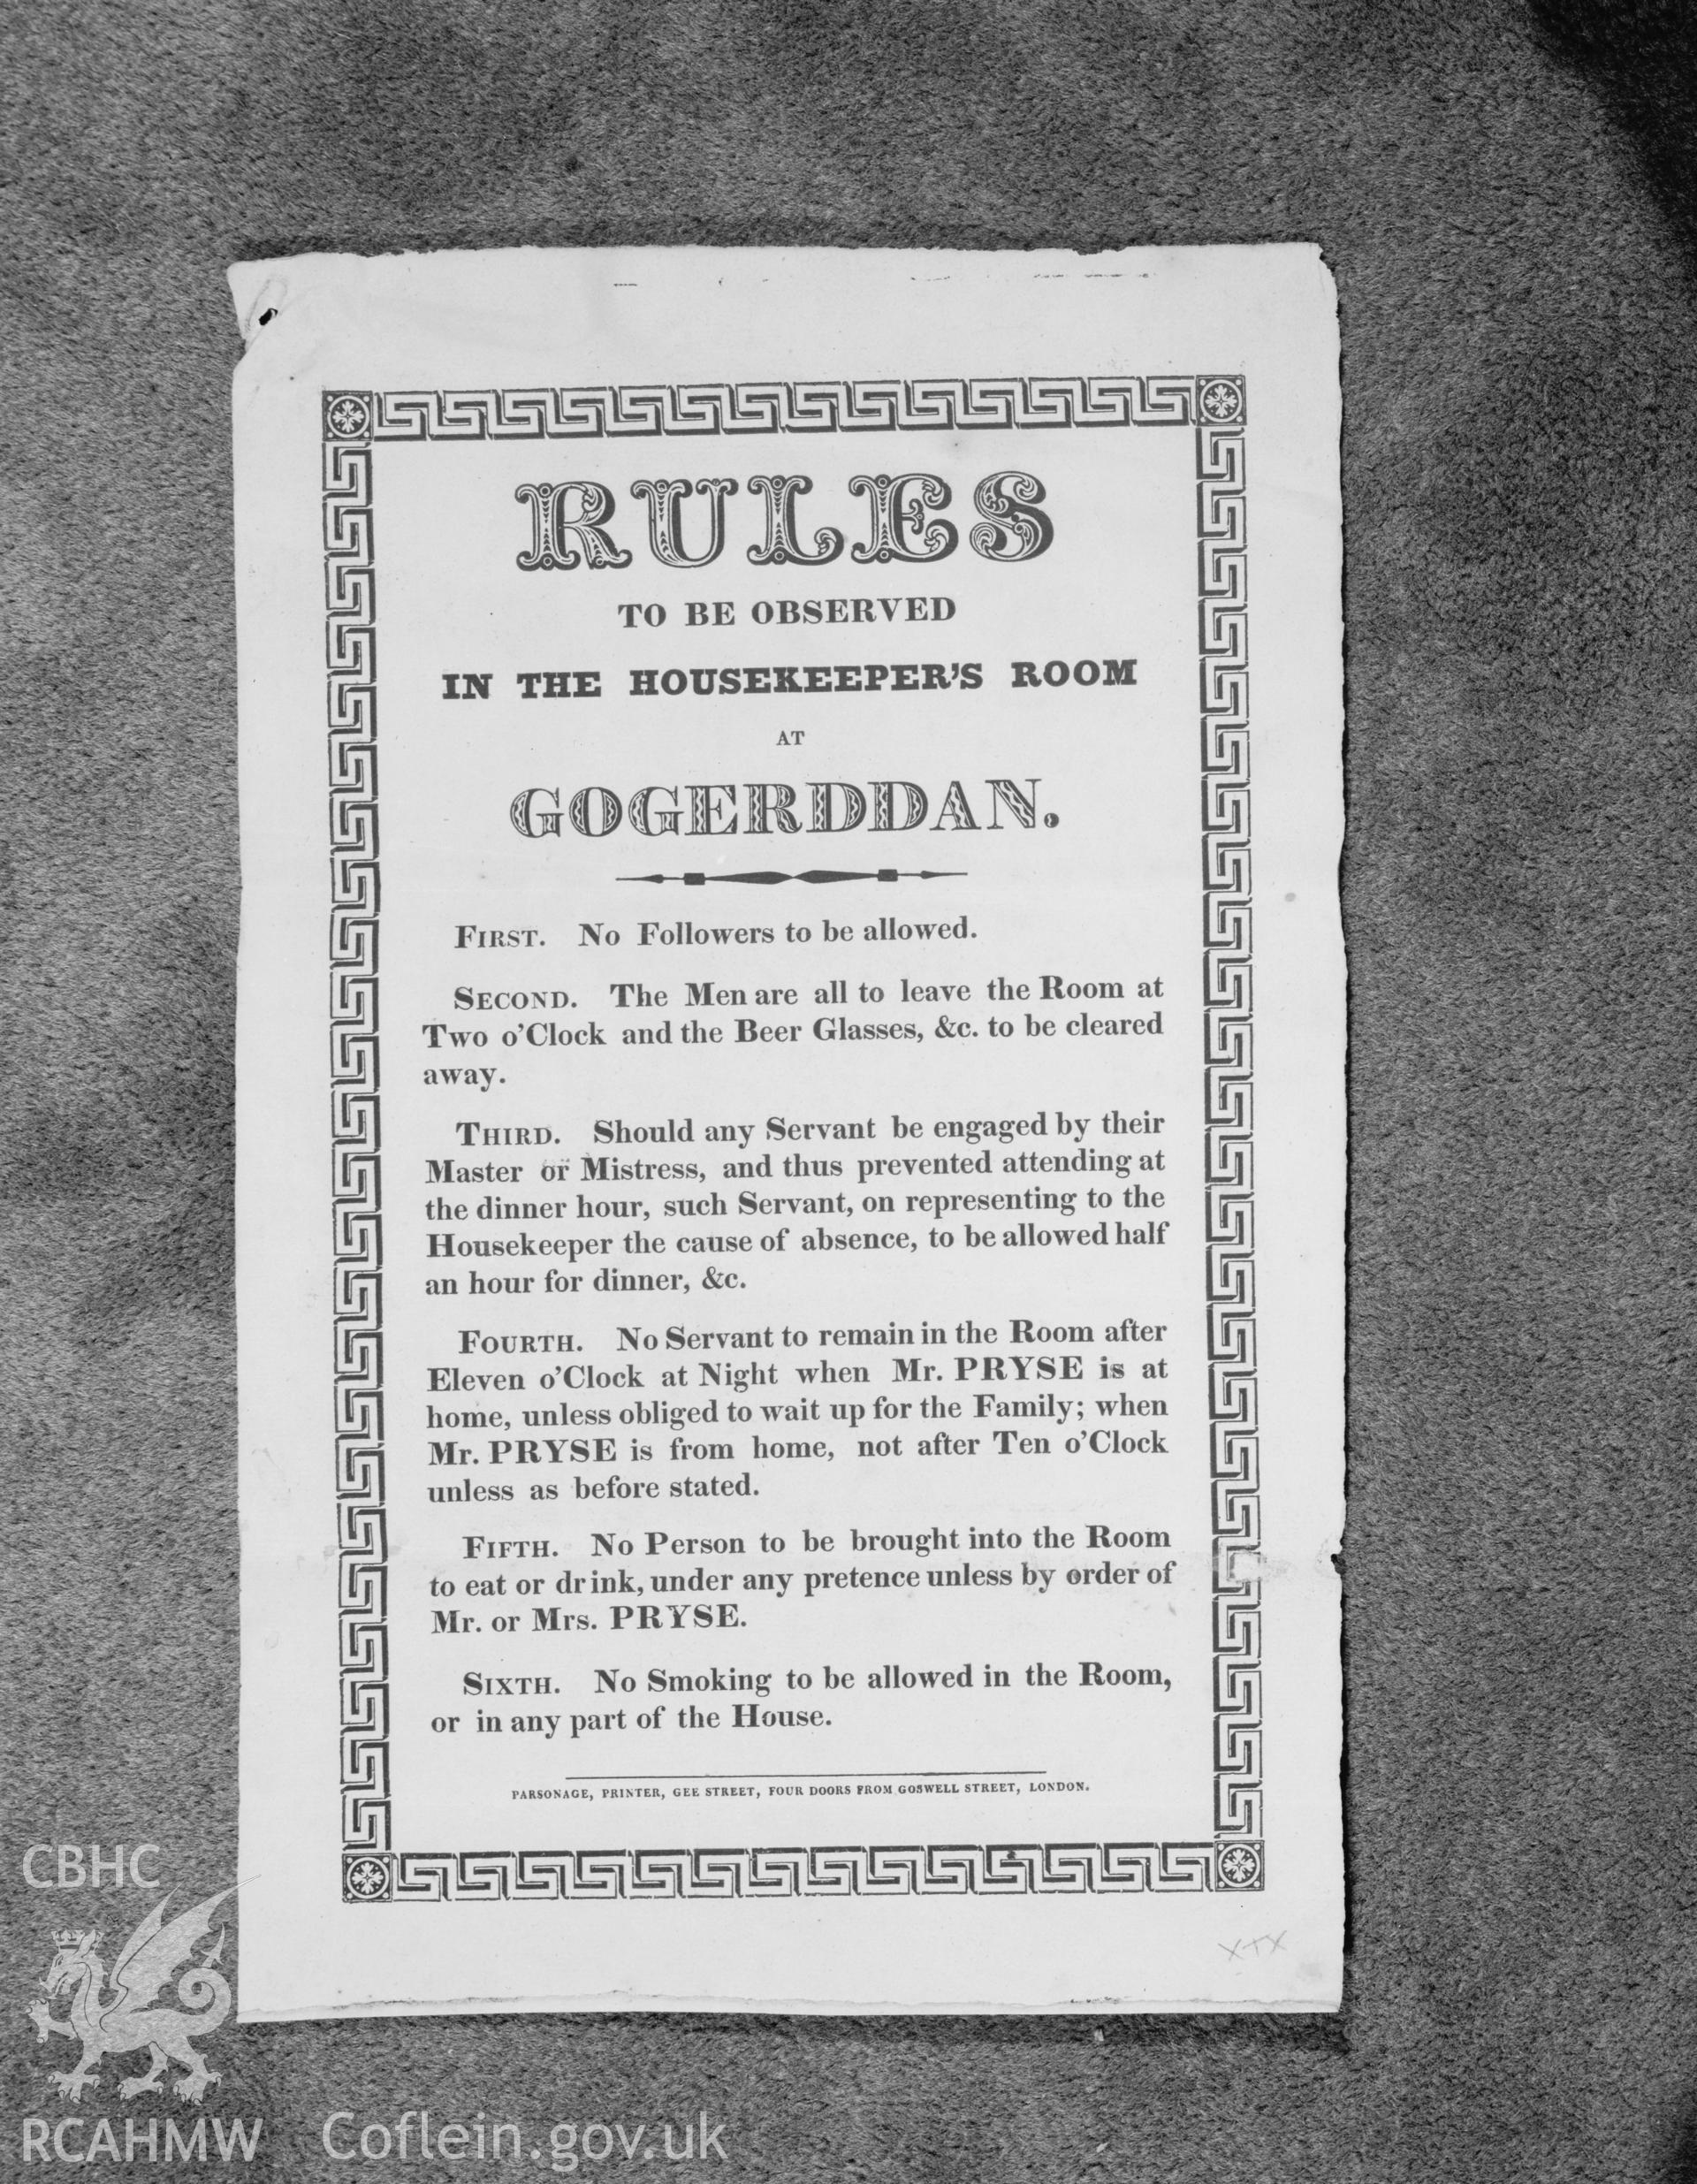 Black and white acetate negative showing a noticeboard at Gogerddan, "rules to be observed in the housekeepr's room".